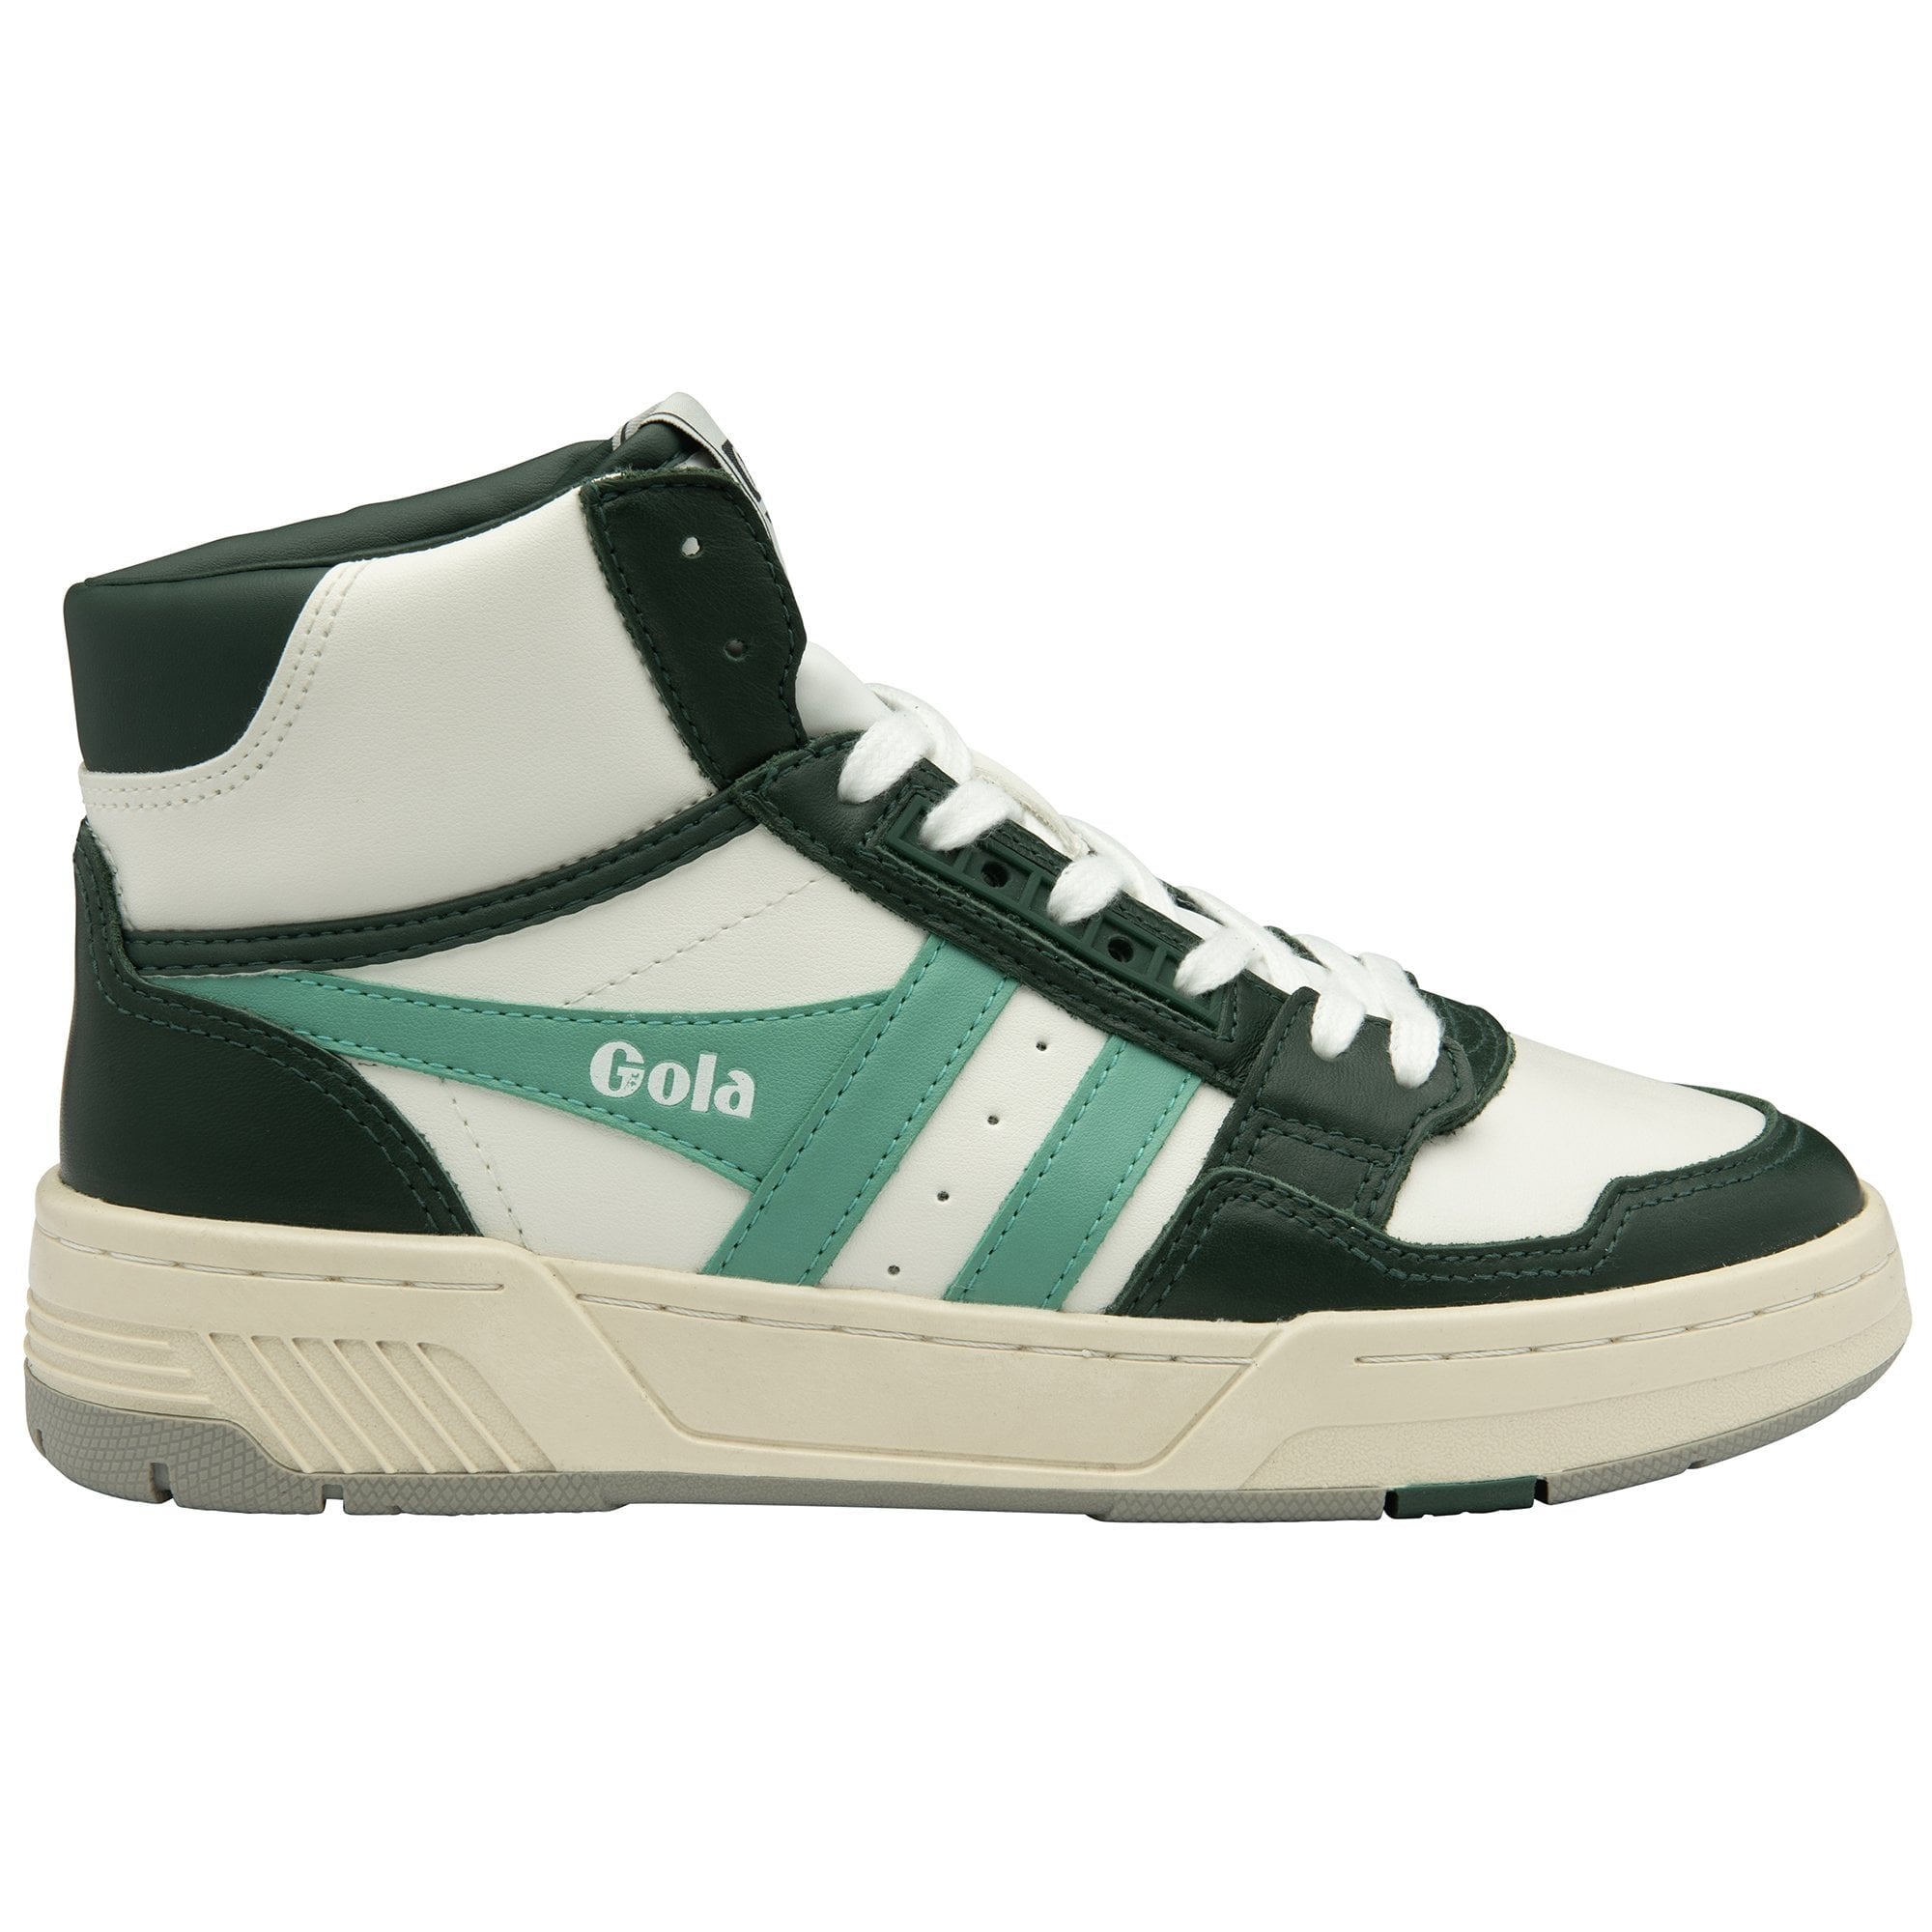 CLB536WN1 - CHALLENGE HIGH SNEAKERS WHITE/EVERGREEN/SEA MIST